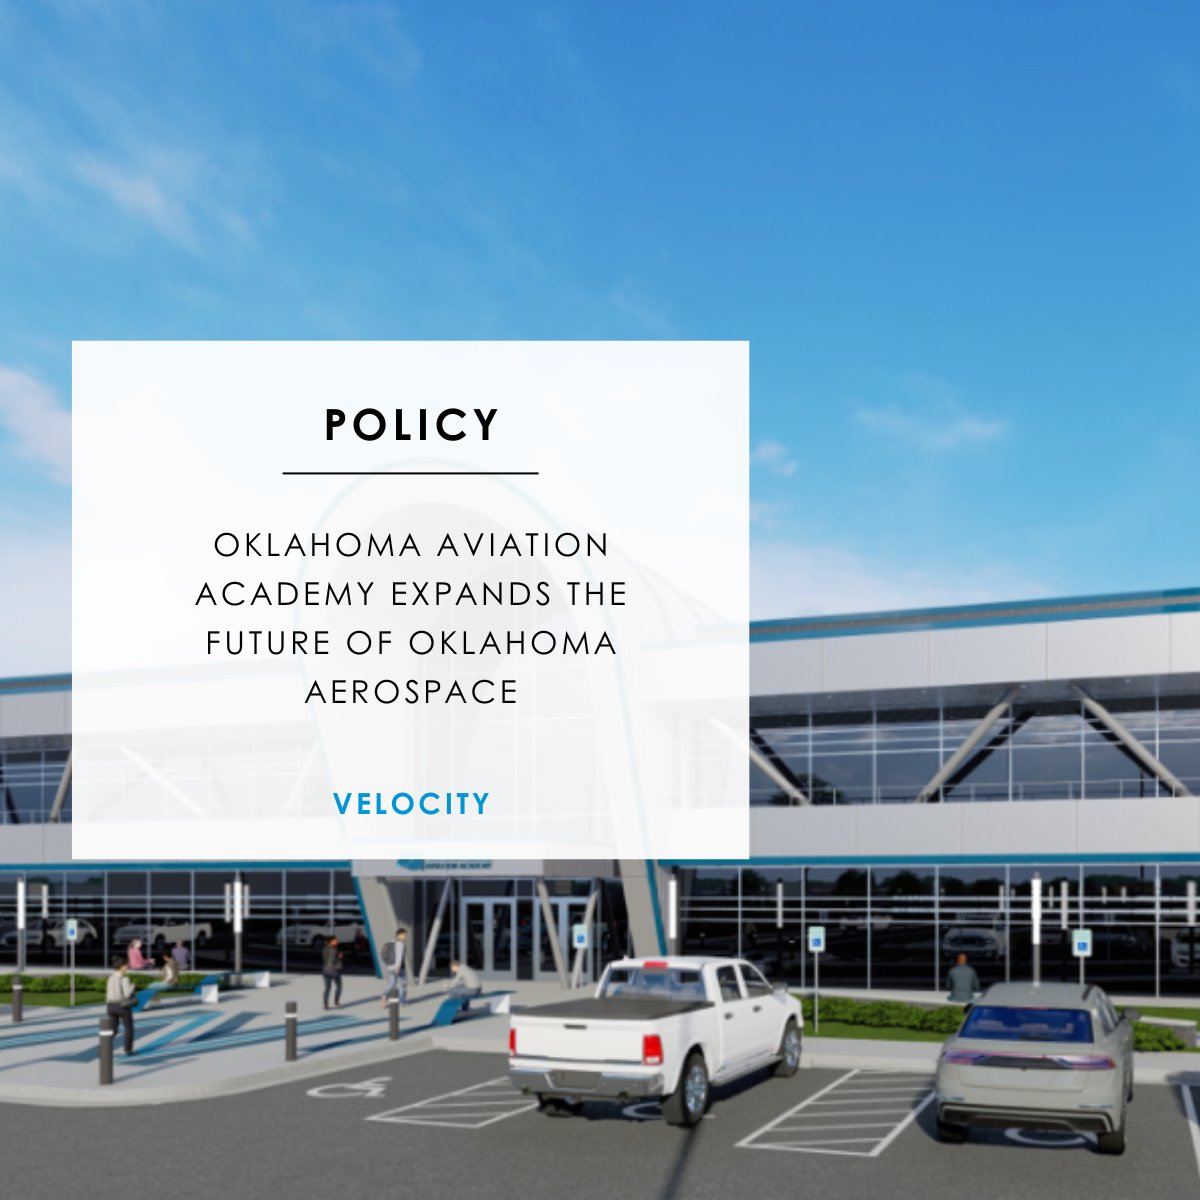 The Oklahoma Aviation Academy (OAA) expansion will help meet the escalating demand for aerospace professionals and protect the industry's $44 billion impact. Discover OAA's transformative vision: bit.ly/3wySqp5